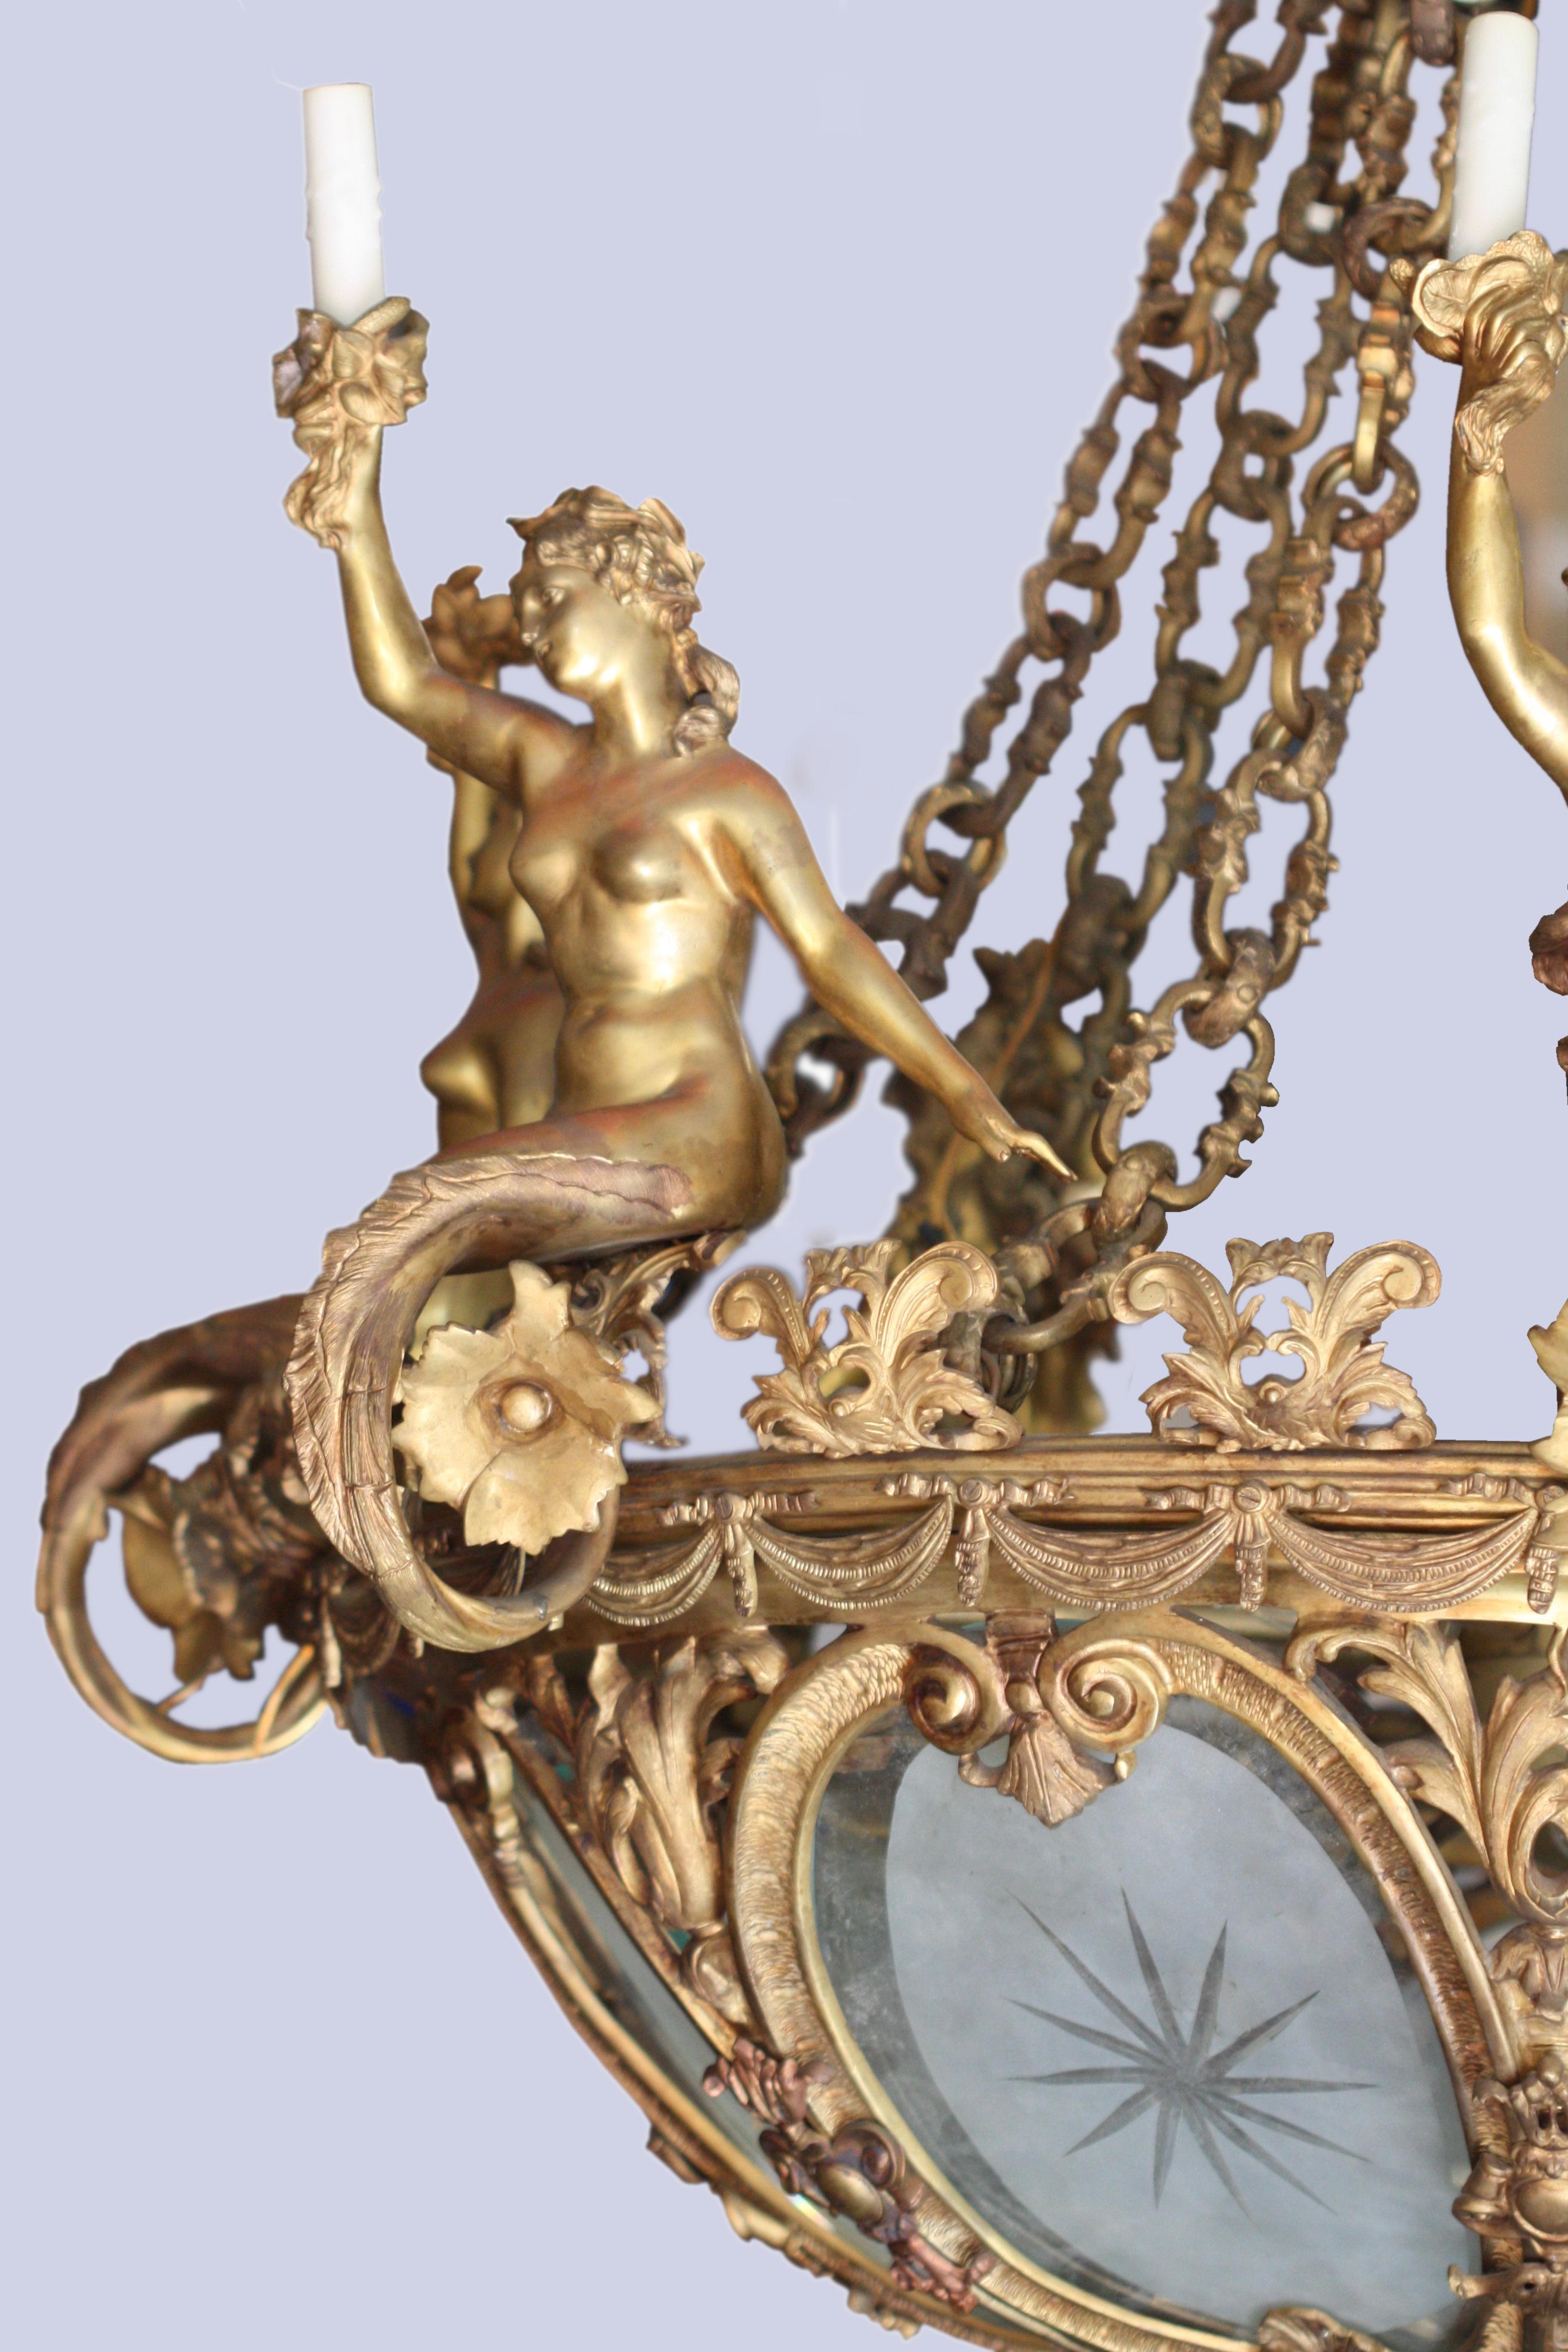 A French Belle Époque gilt bronze chandelier 
late 19th century.
The corona surmounted by stylized foliate motifs, suspending an etched glass bowl within a C-scroll pierced frame, topped with acanthus leaf finials interspersed with mermaids holding